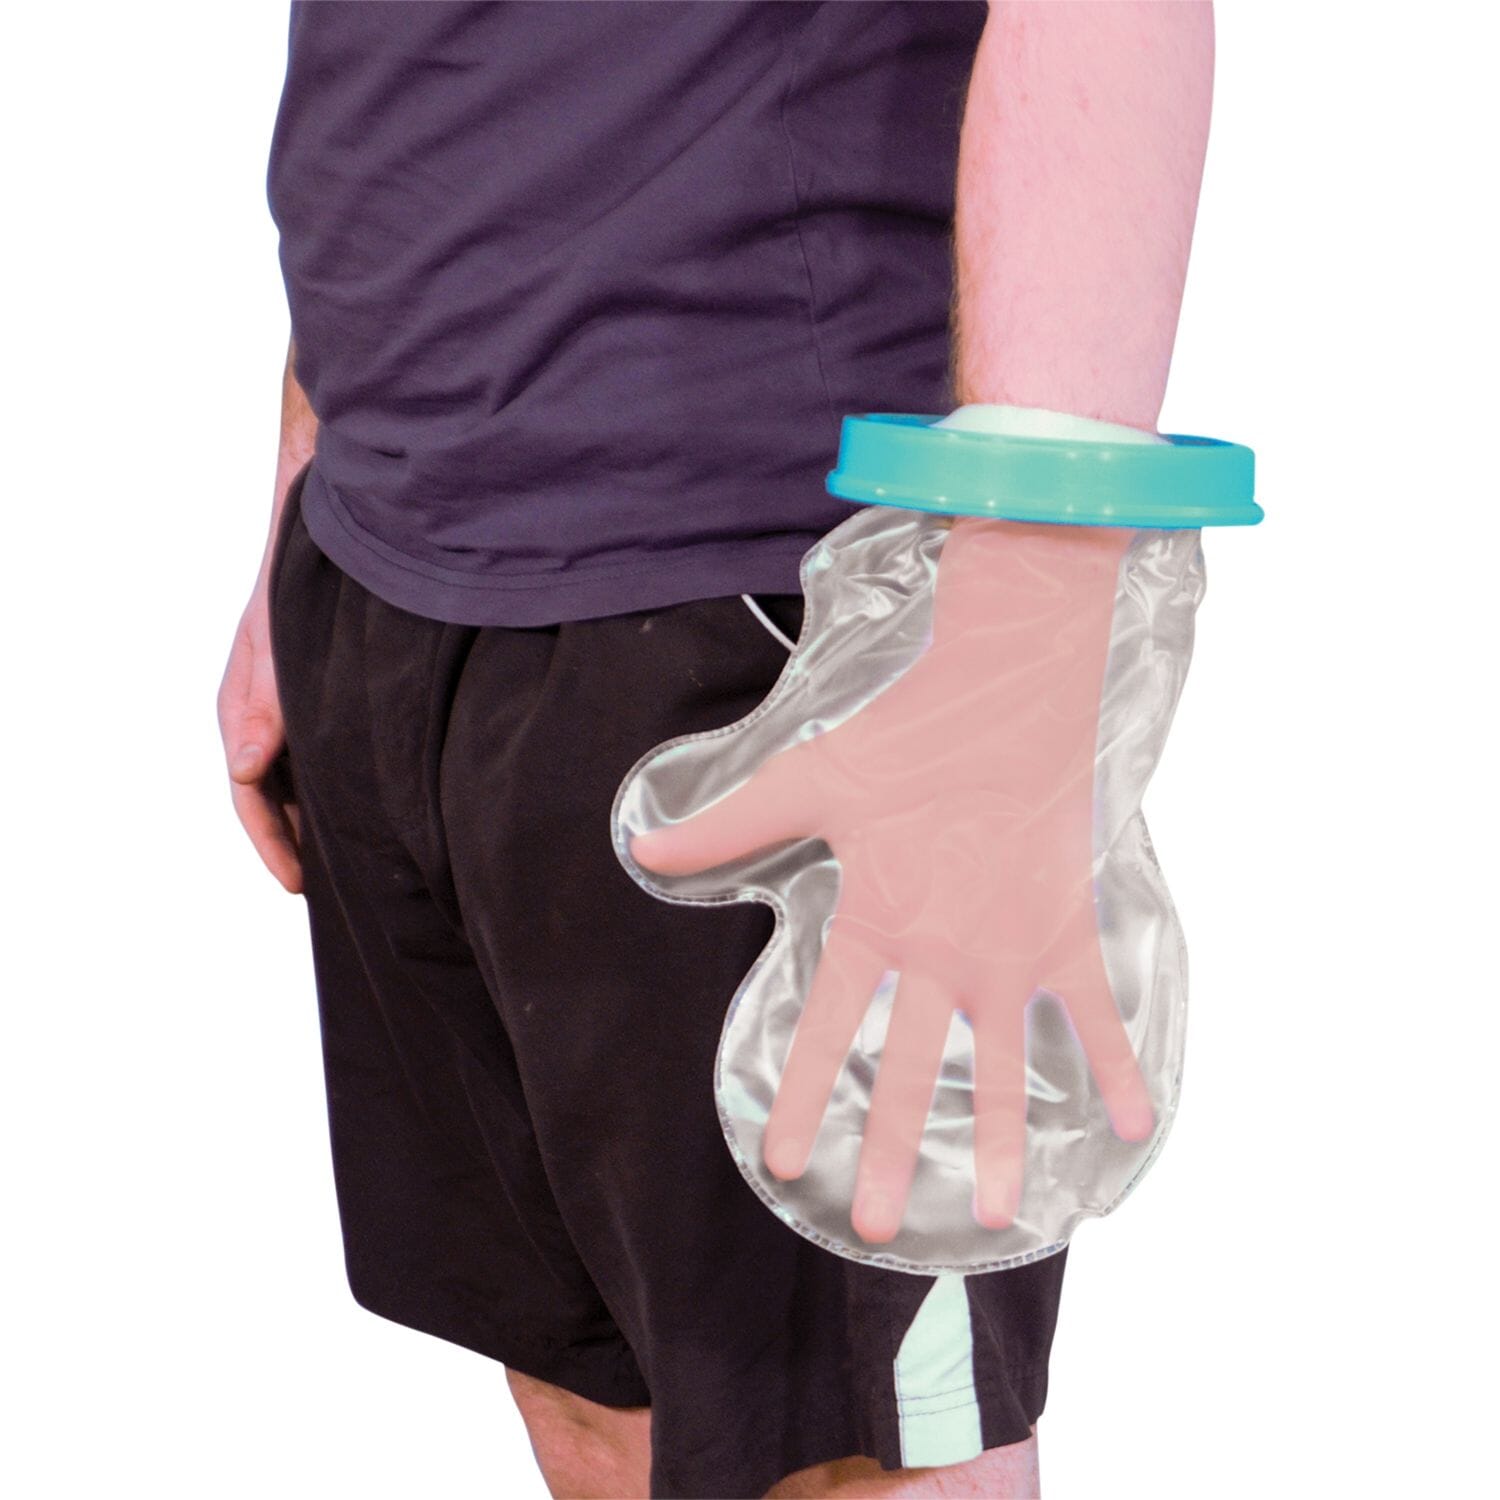 View Aidapt Waterproof Cast and Bandage Protector for use whilst ShoweringBathing Adult Hand information